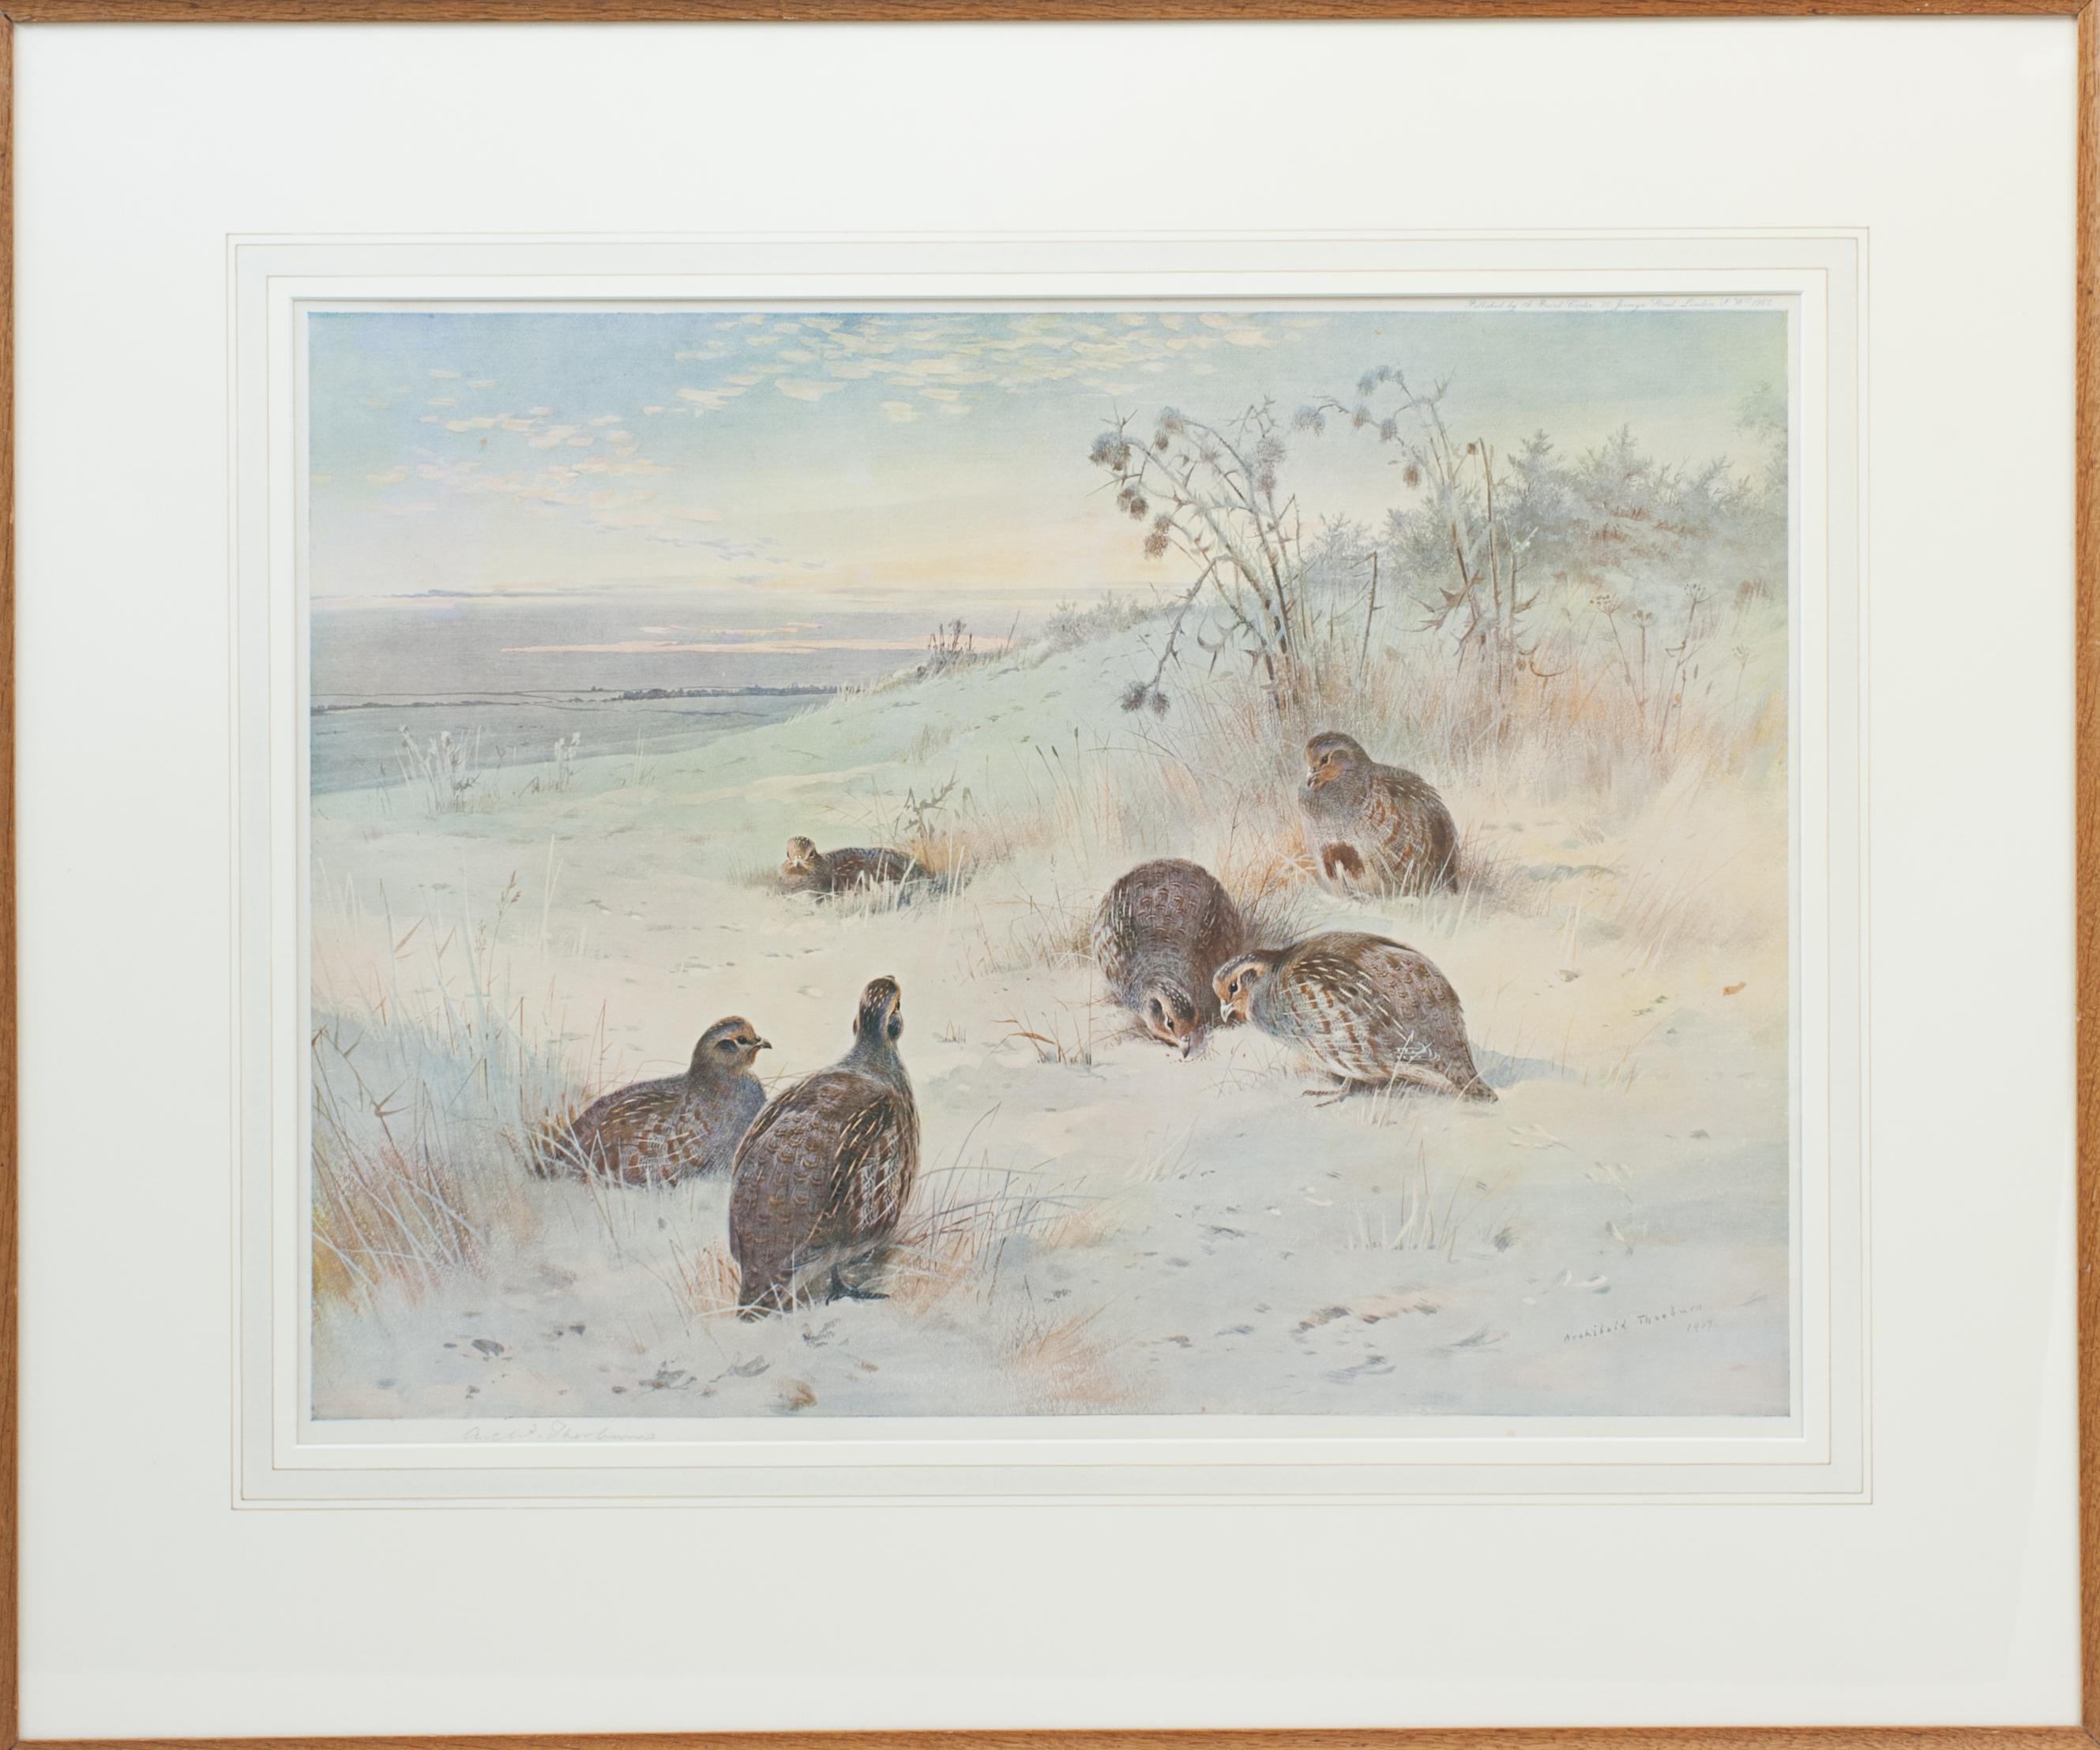 Sporting Art Antique Bird Print, Signed by Archibald Thorburn, Partridges, a Frosty Morning. For Sale